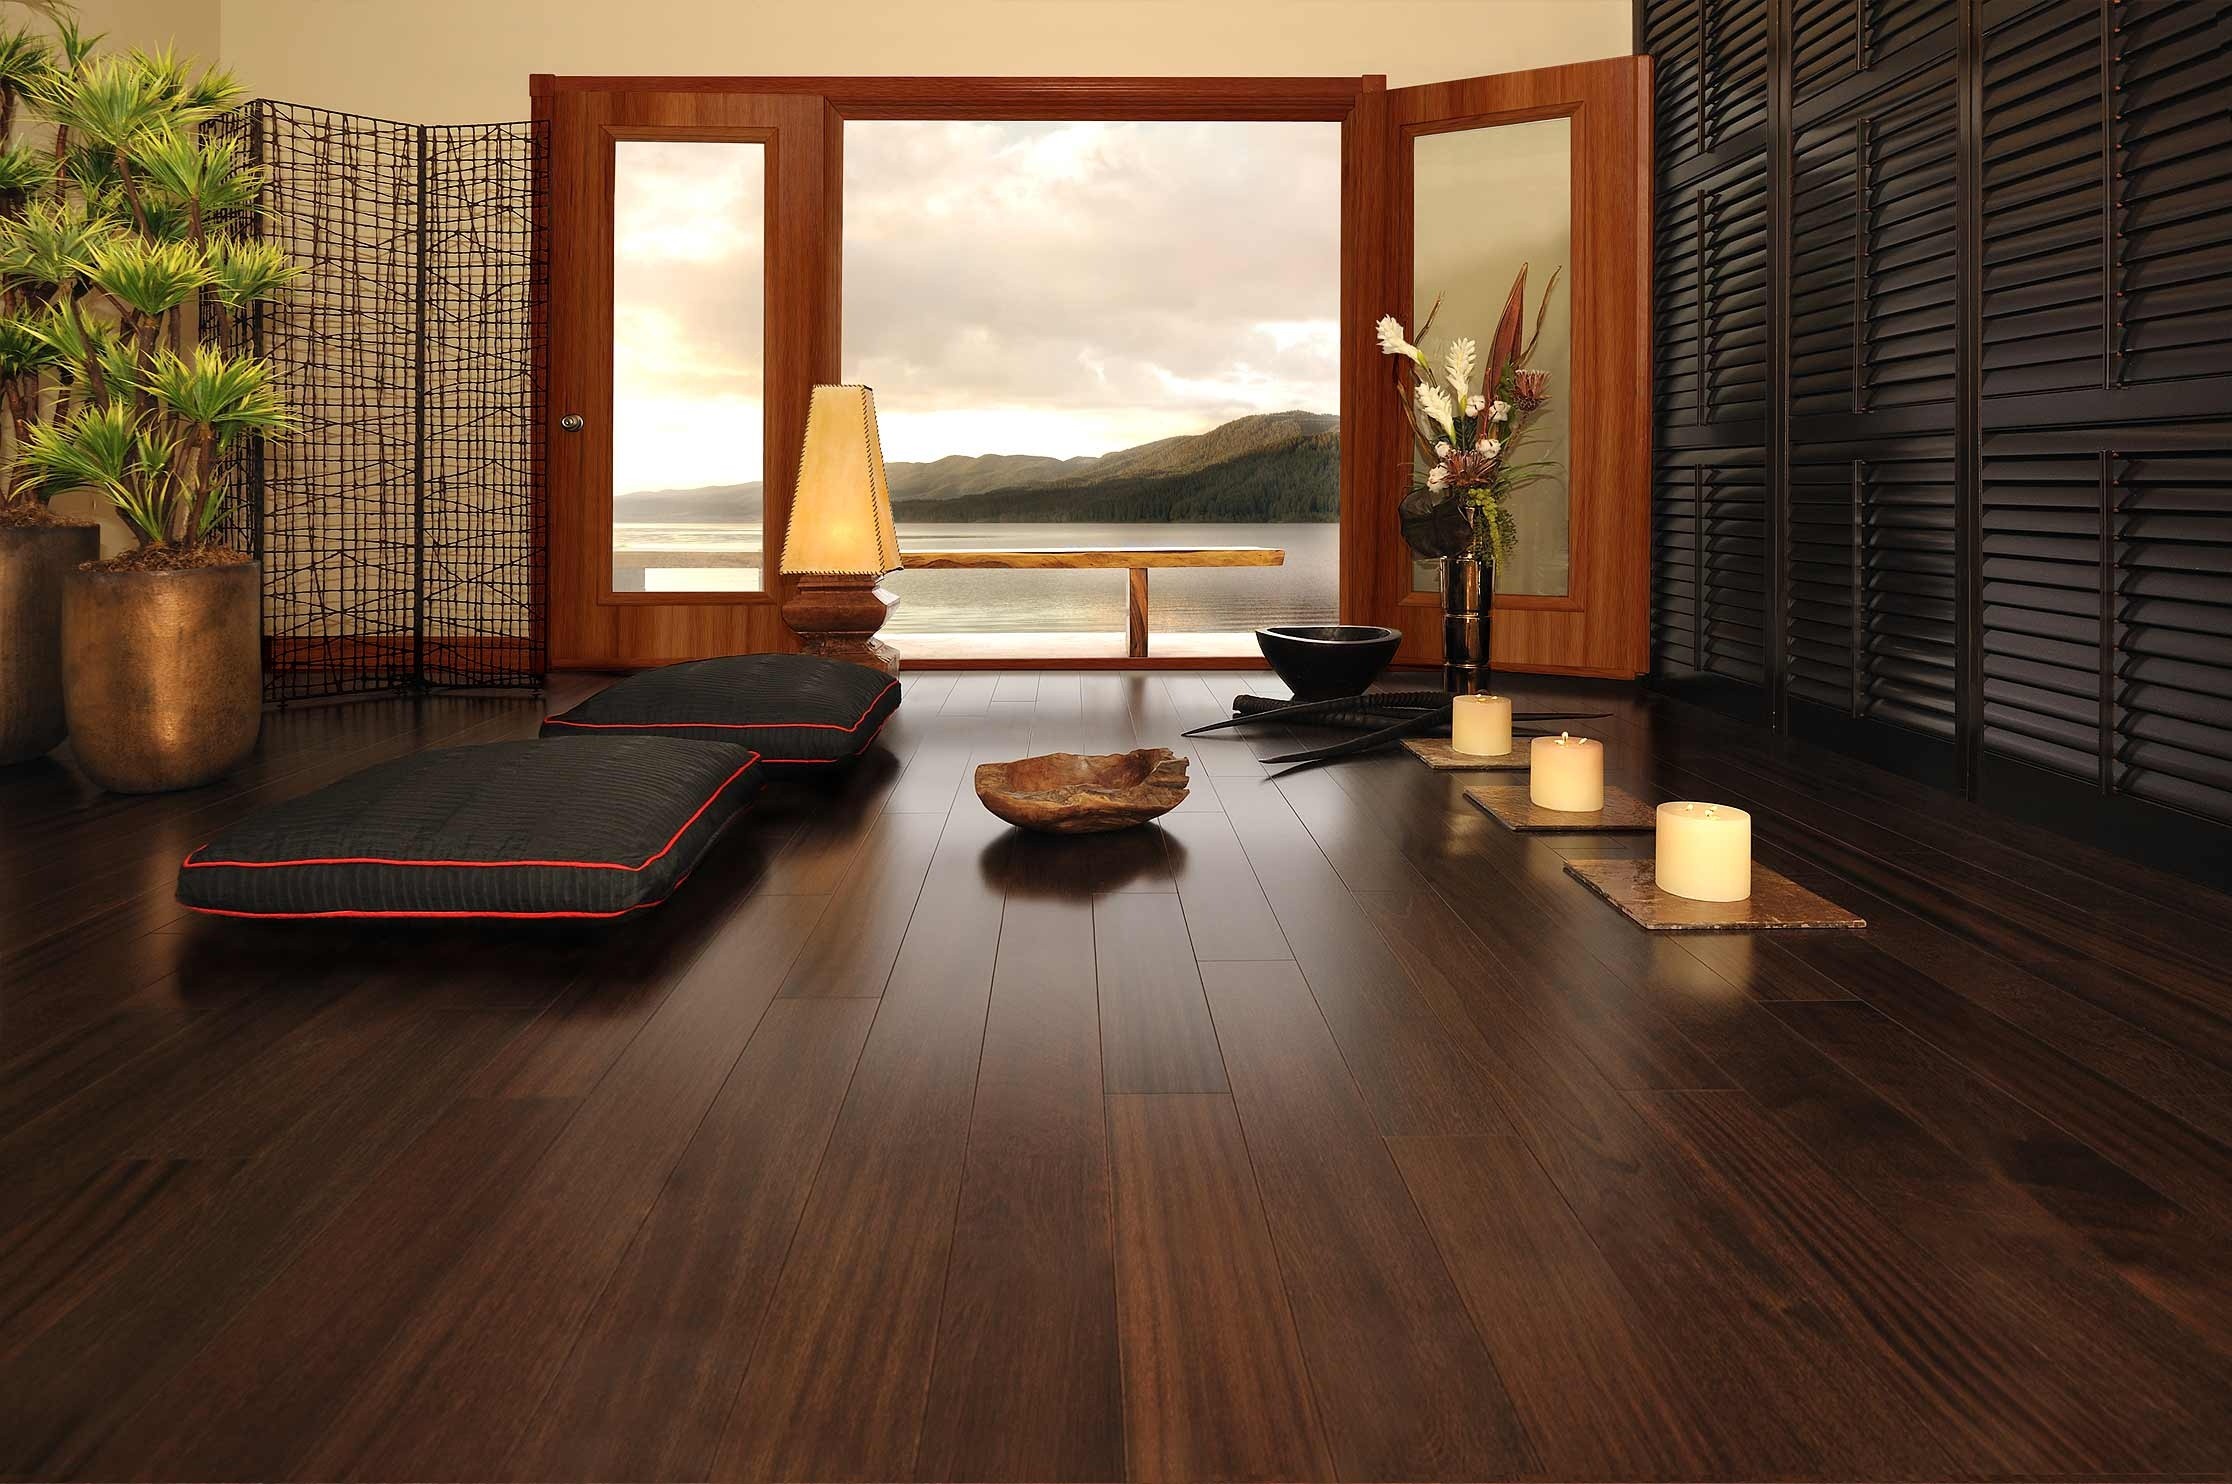 What are the types of wooden floors?